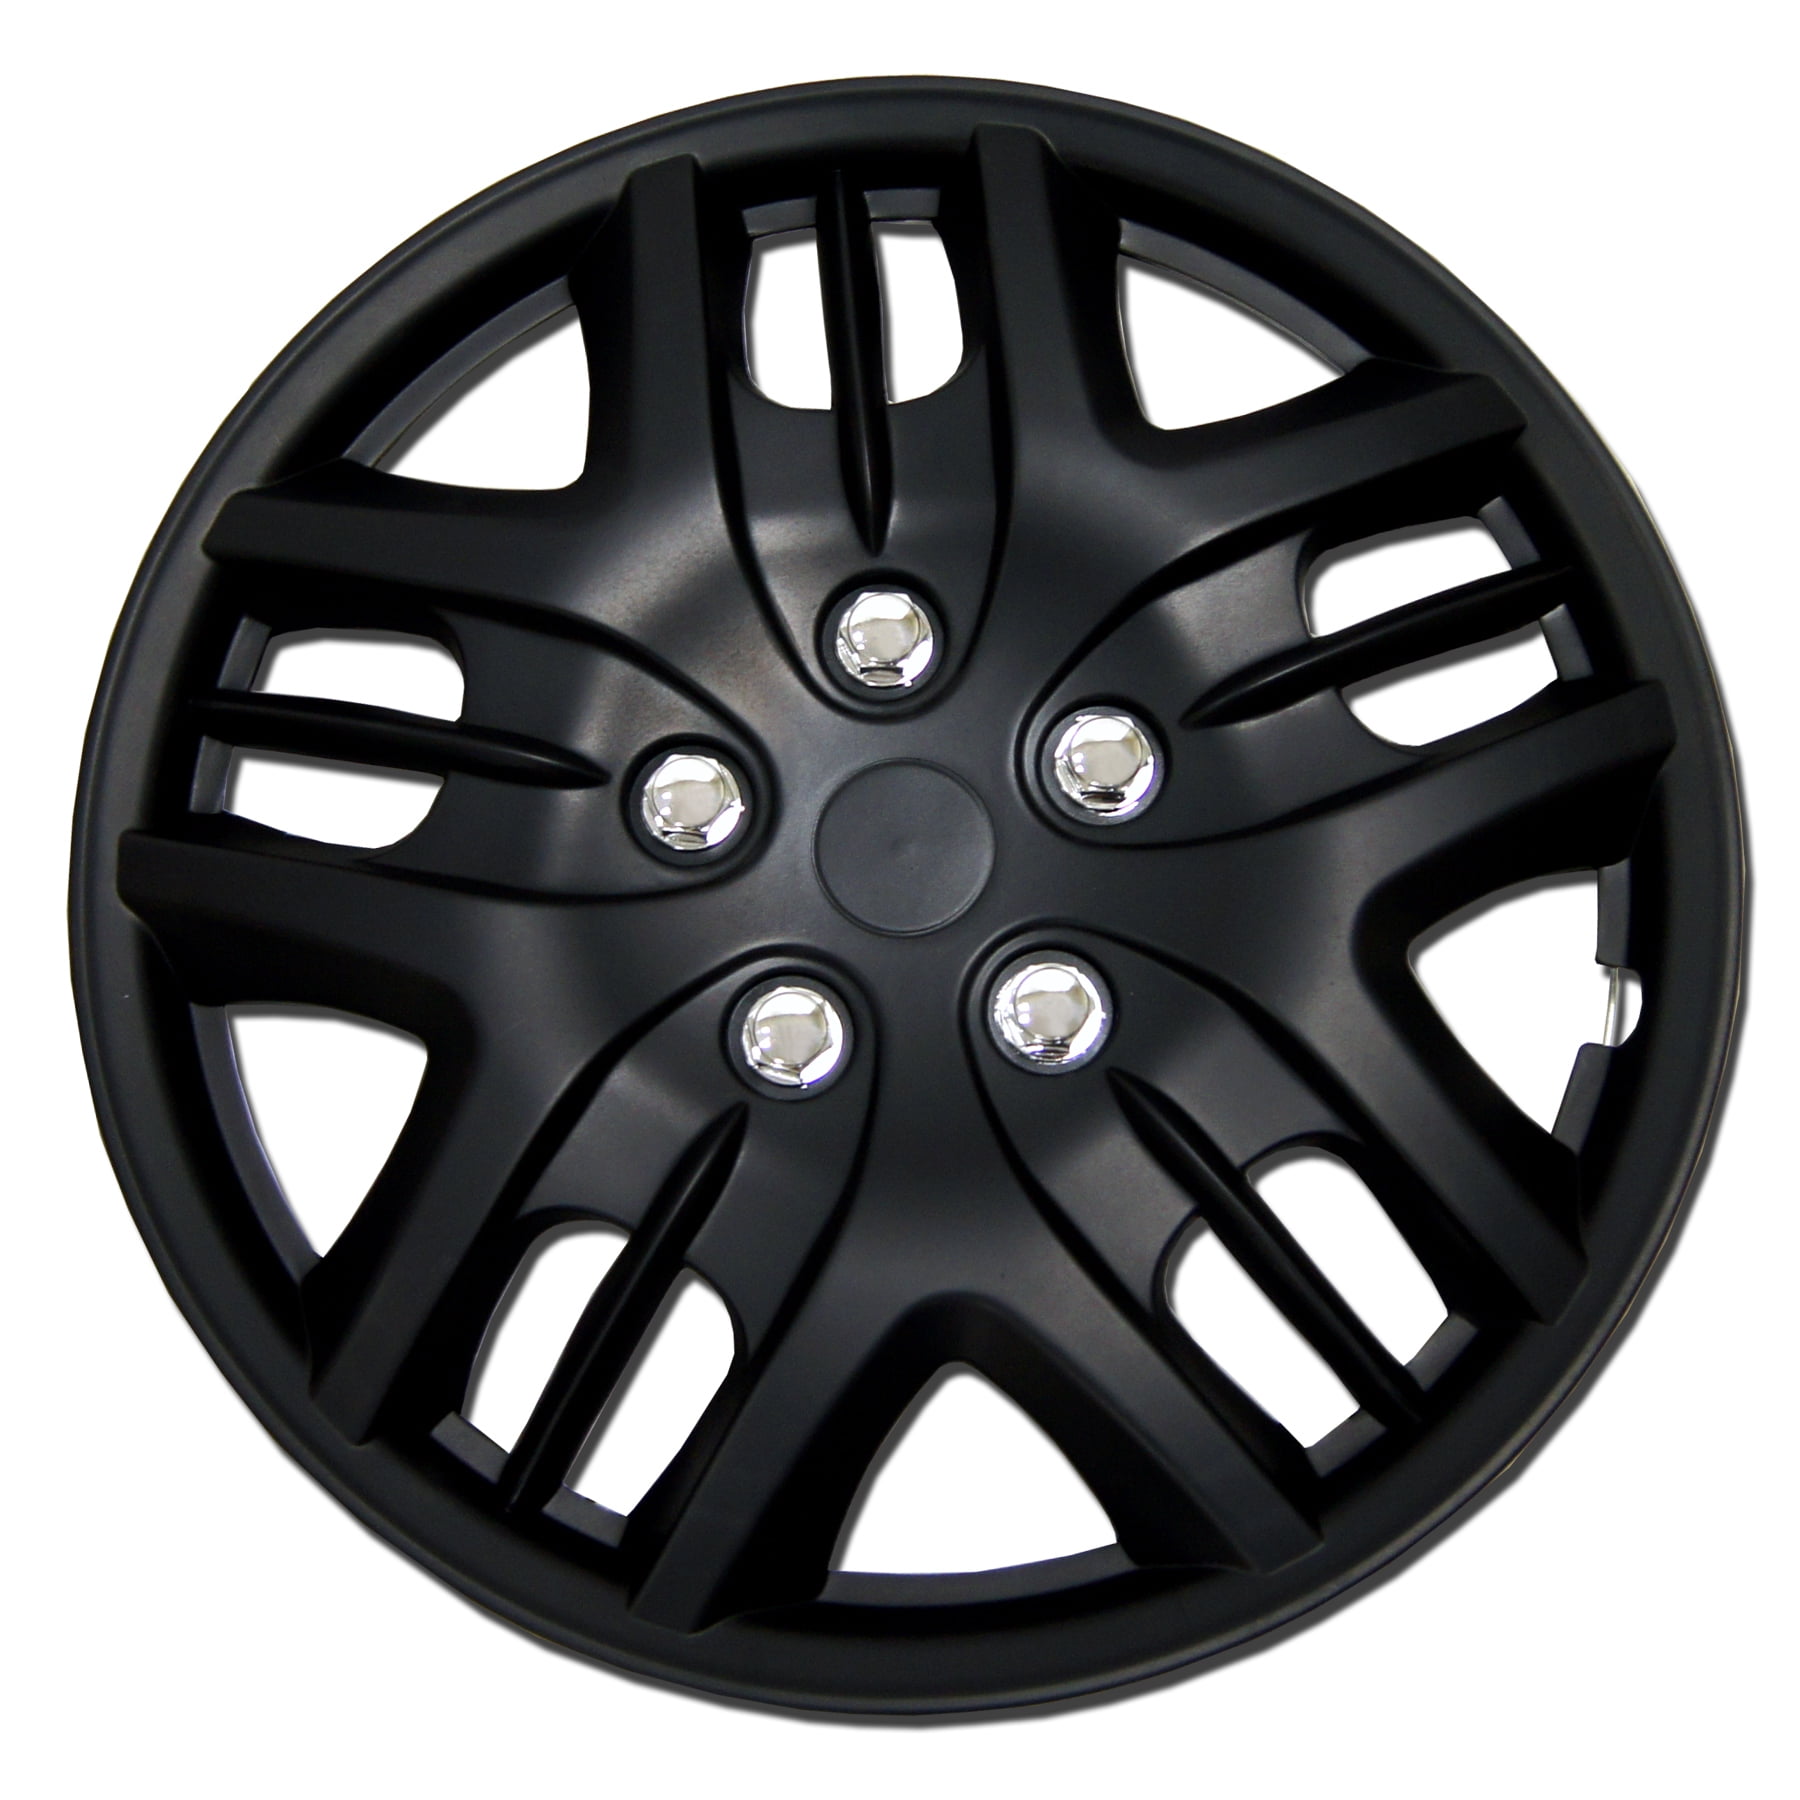 Pop-On Type Matte Black Wheel Covers Hub-caps Tuningpros WC3-15-613-B 15-Inches Style Snap-On Pack of 4 Hubcaps 